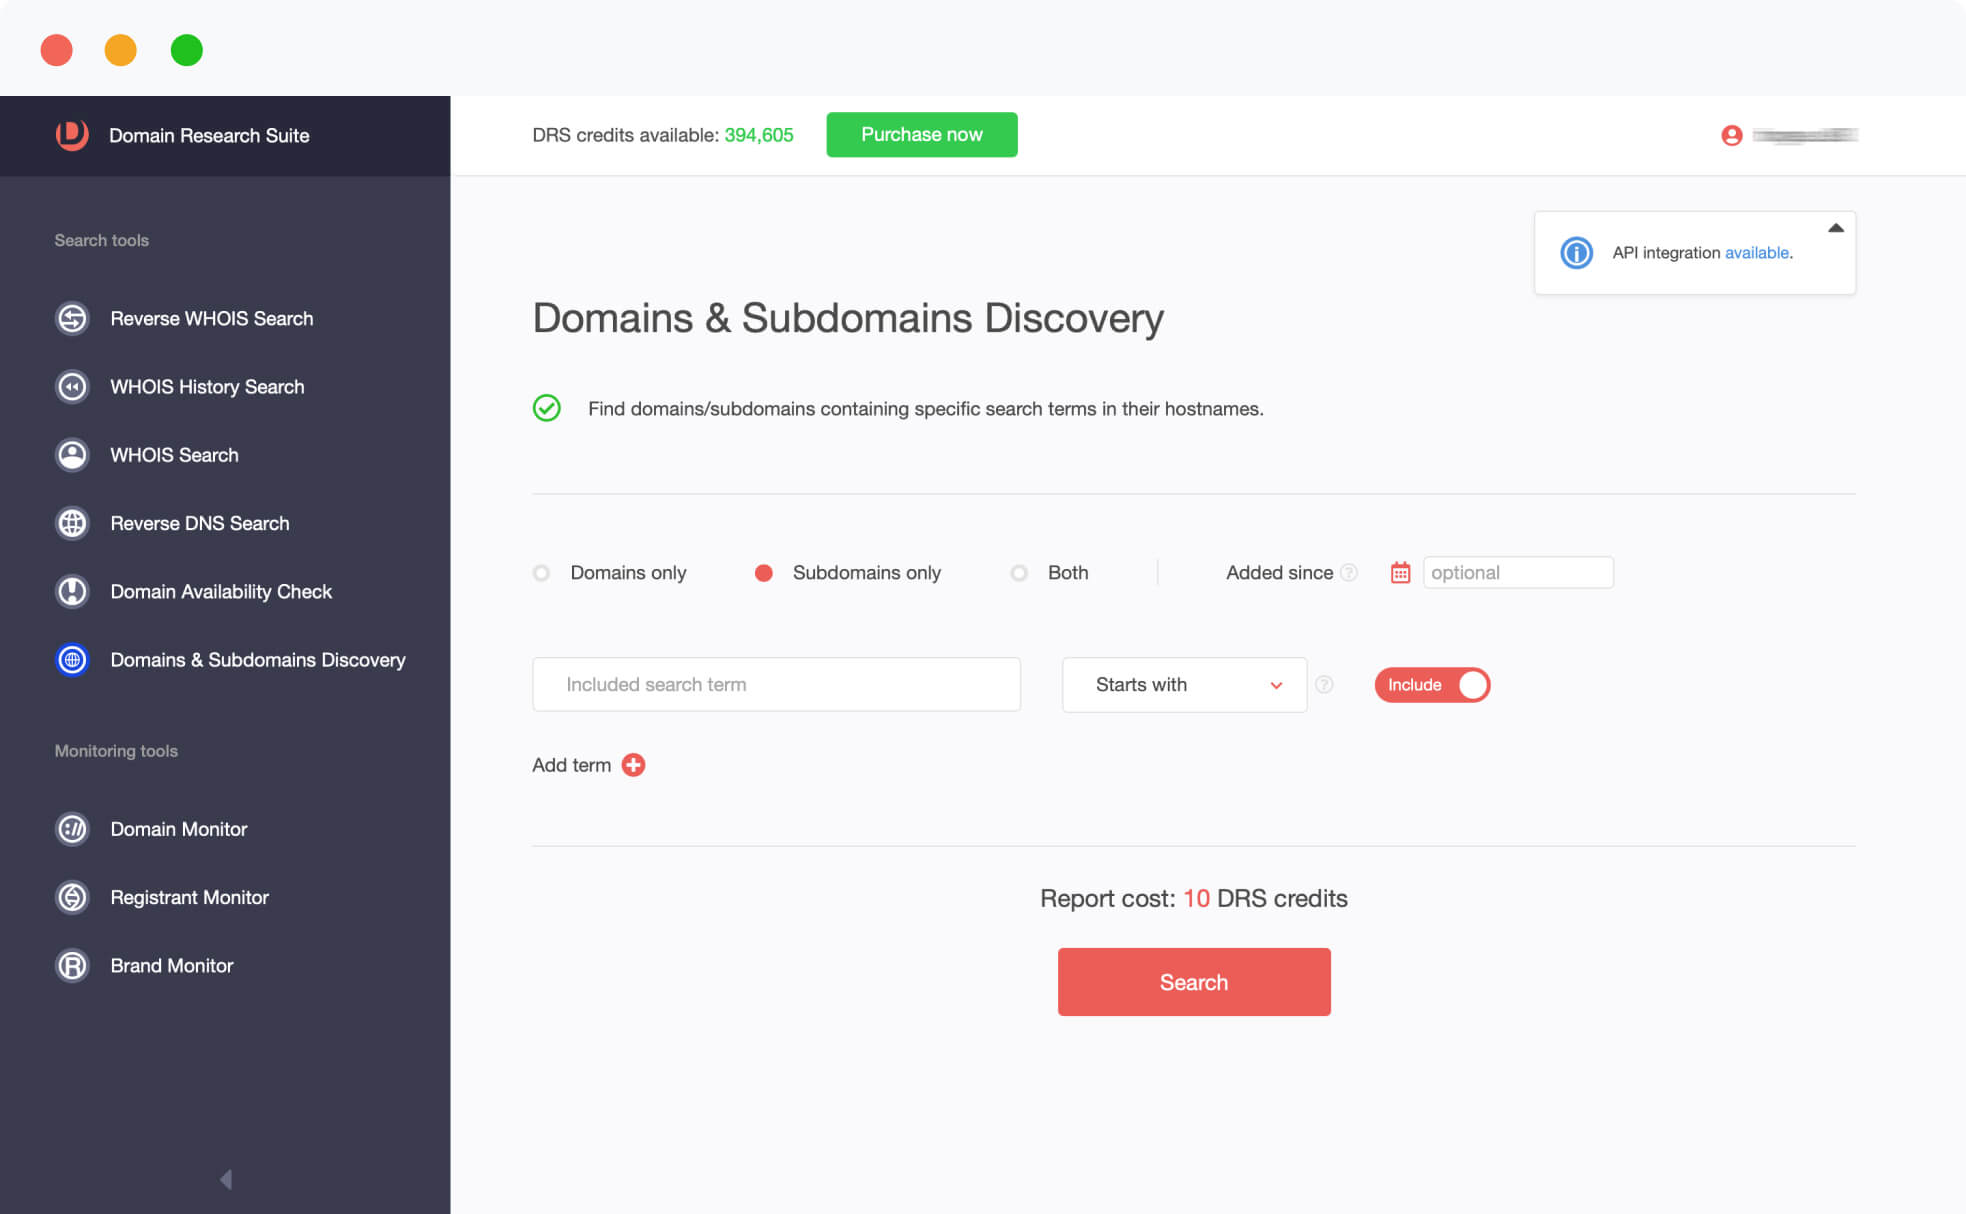 Domains & Subdomains Discovery